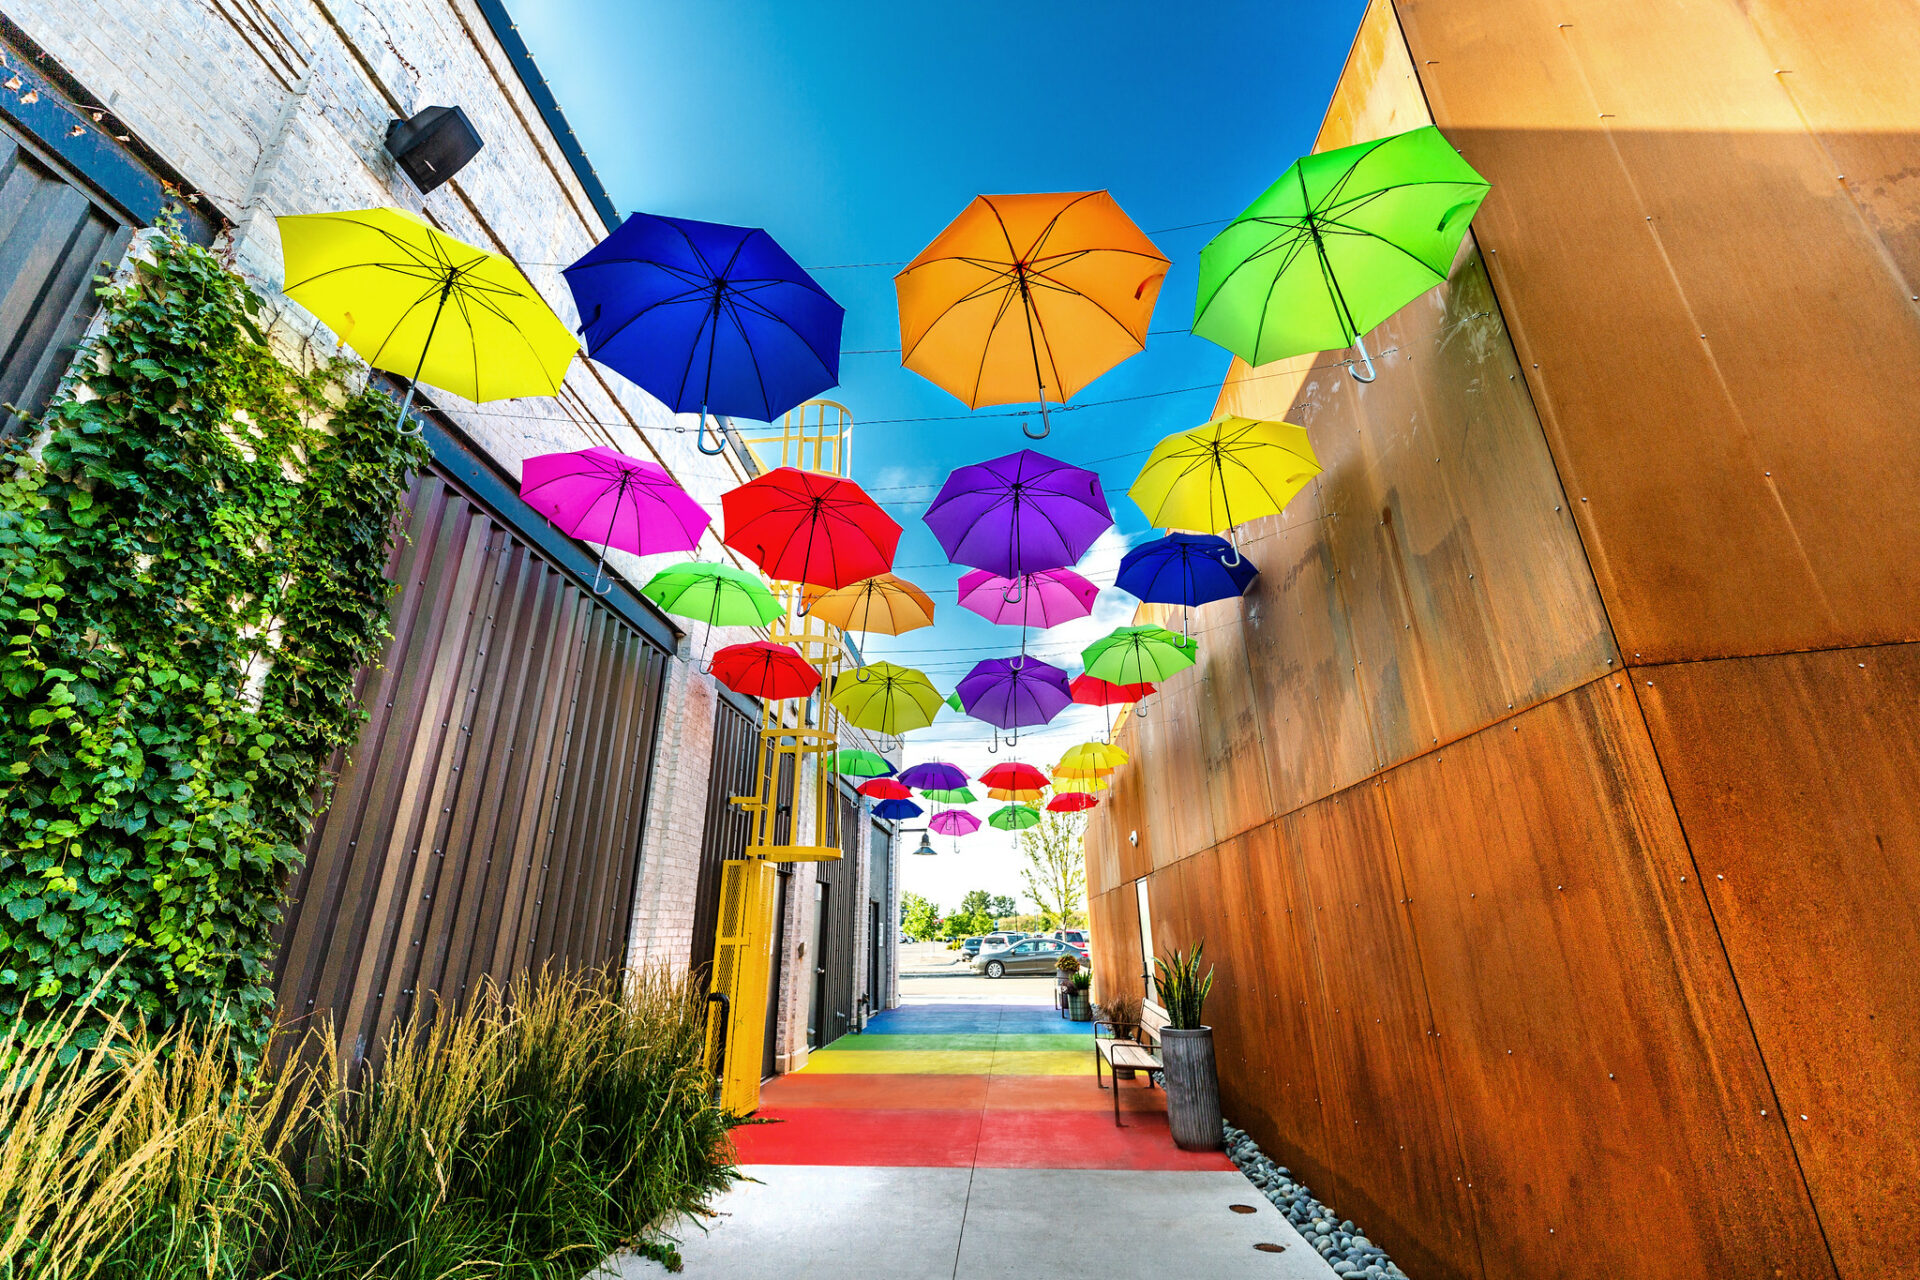 Alley with rainbow painted sidewalk, covered overhead by colorful umbrellas